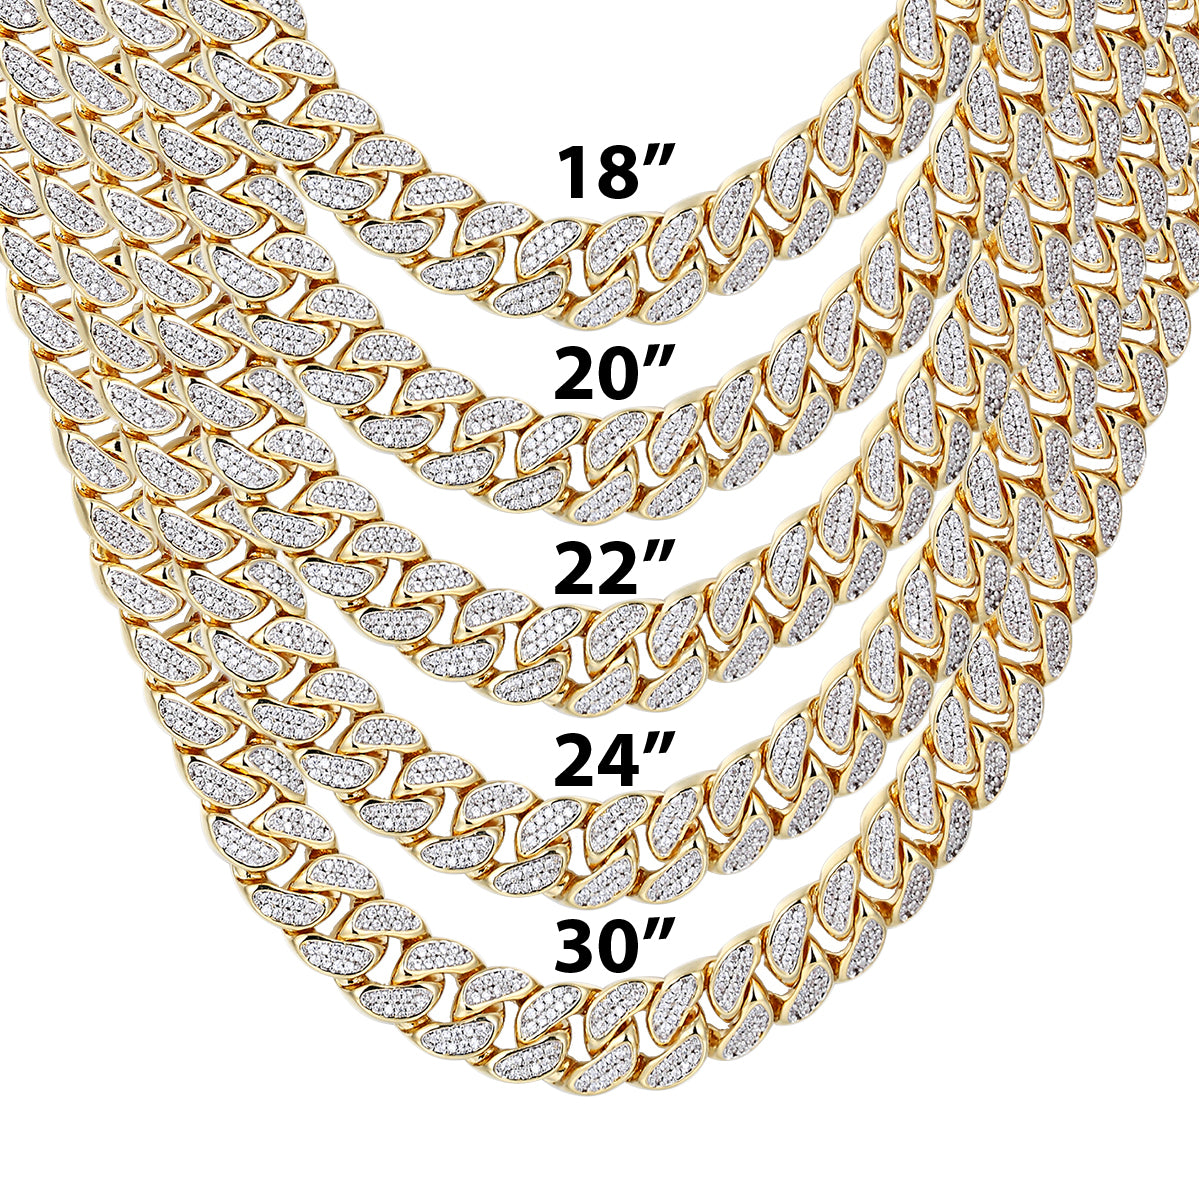 9mm Closed Miami Cuban Links Icy 18-30" Chain